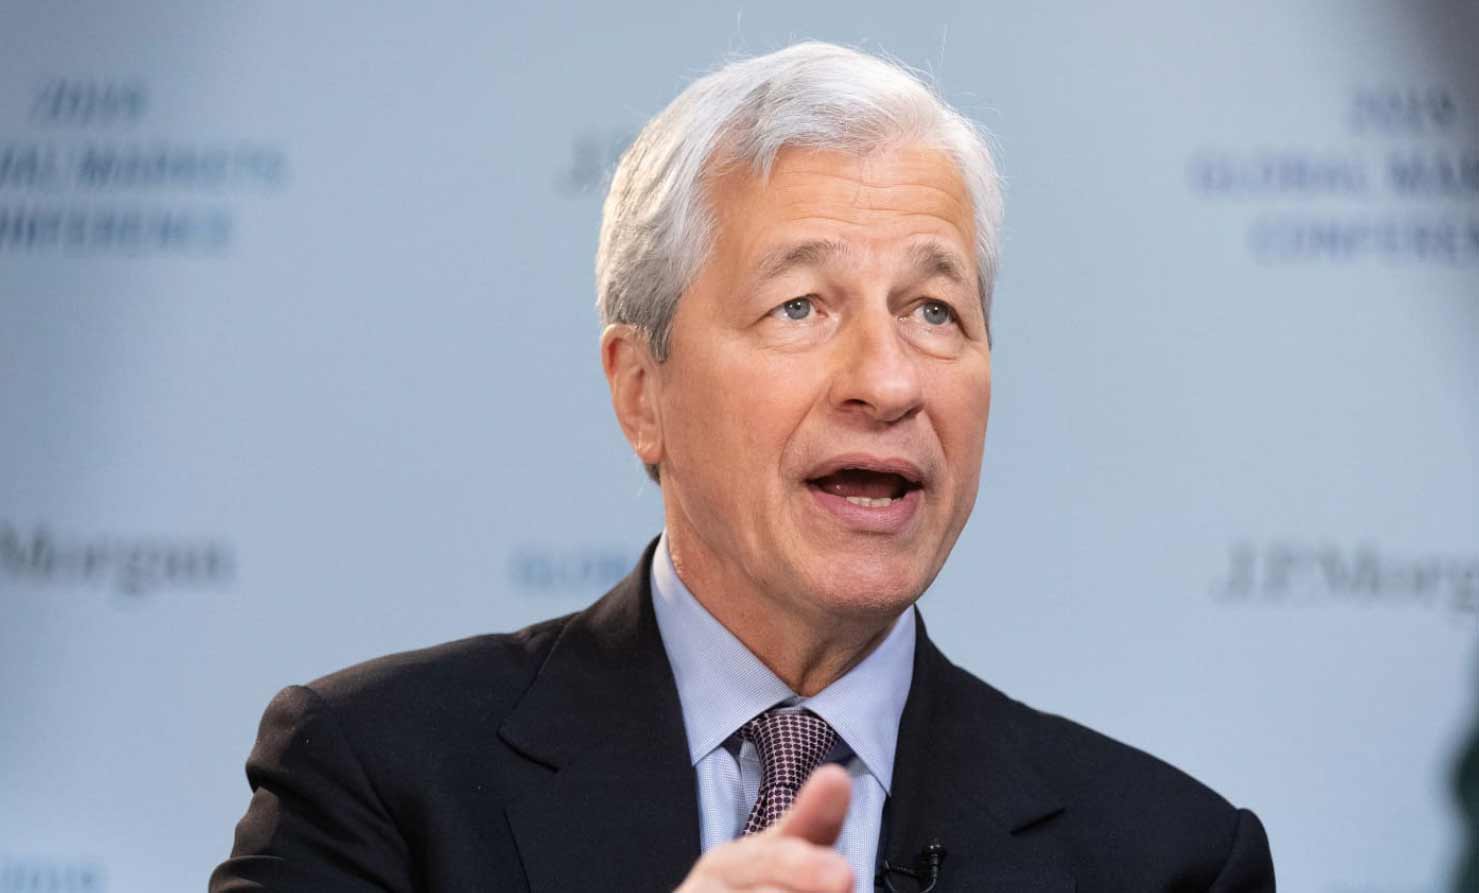 Be prepared, says JPMorgan Chase CEO Jamie Dimon as he warns of looming recession